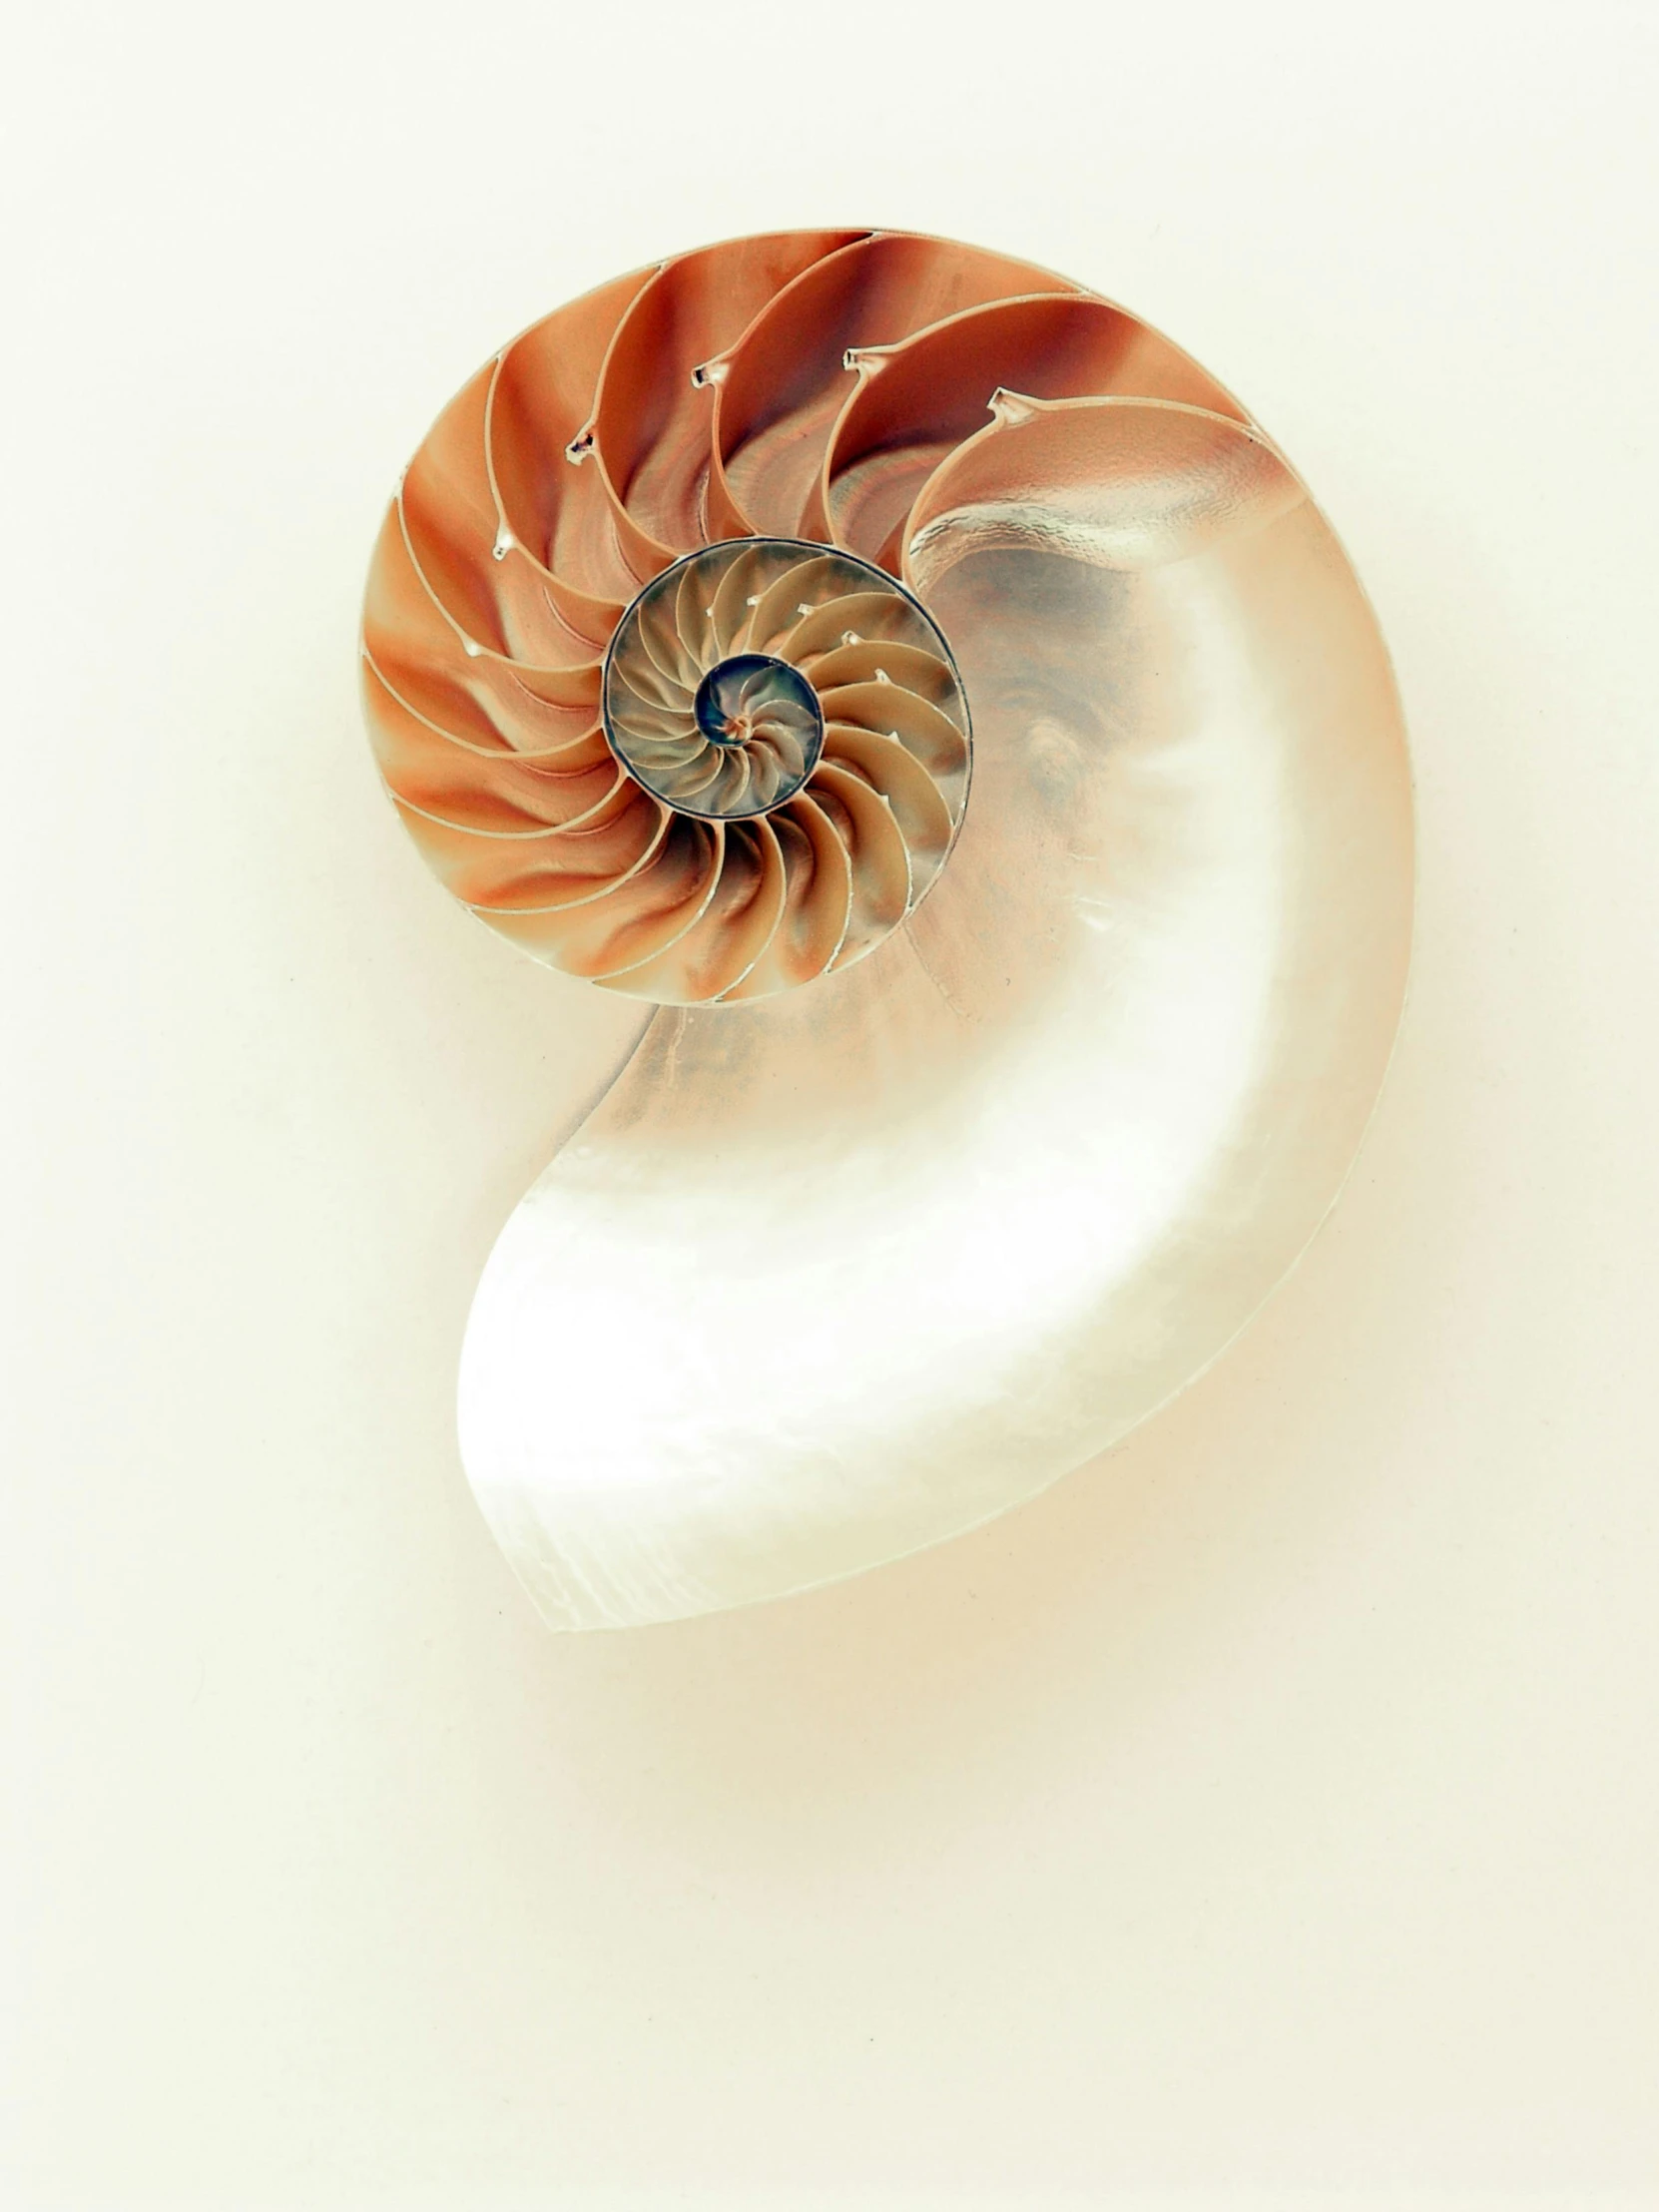 a close up of a shell on a white surface, a digital rendering, shutterstock contest winner, renaissance, ignant, sprial, sea horse, pale orange colors